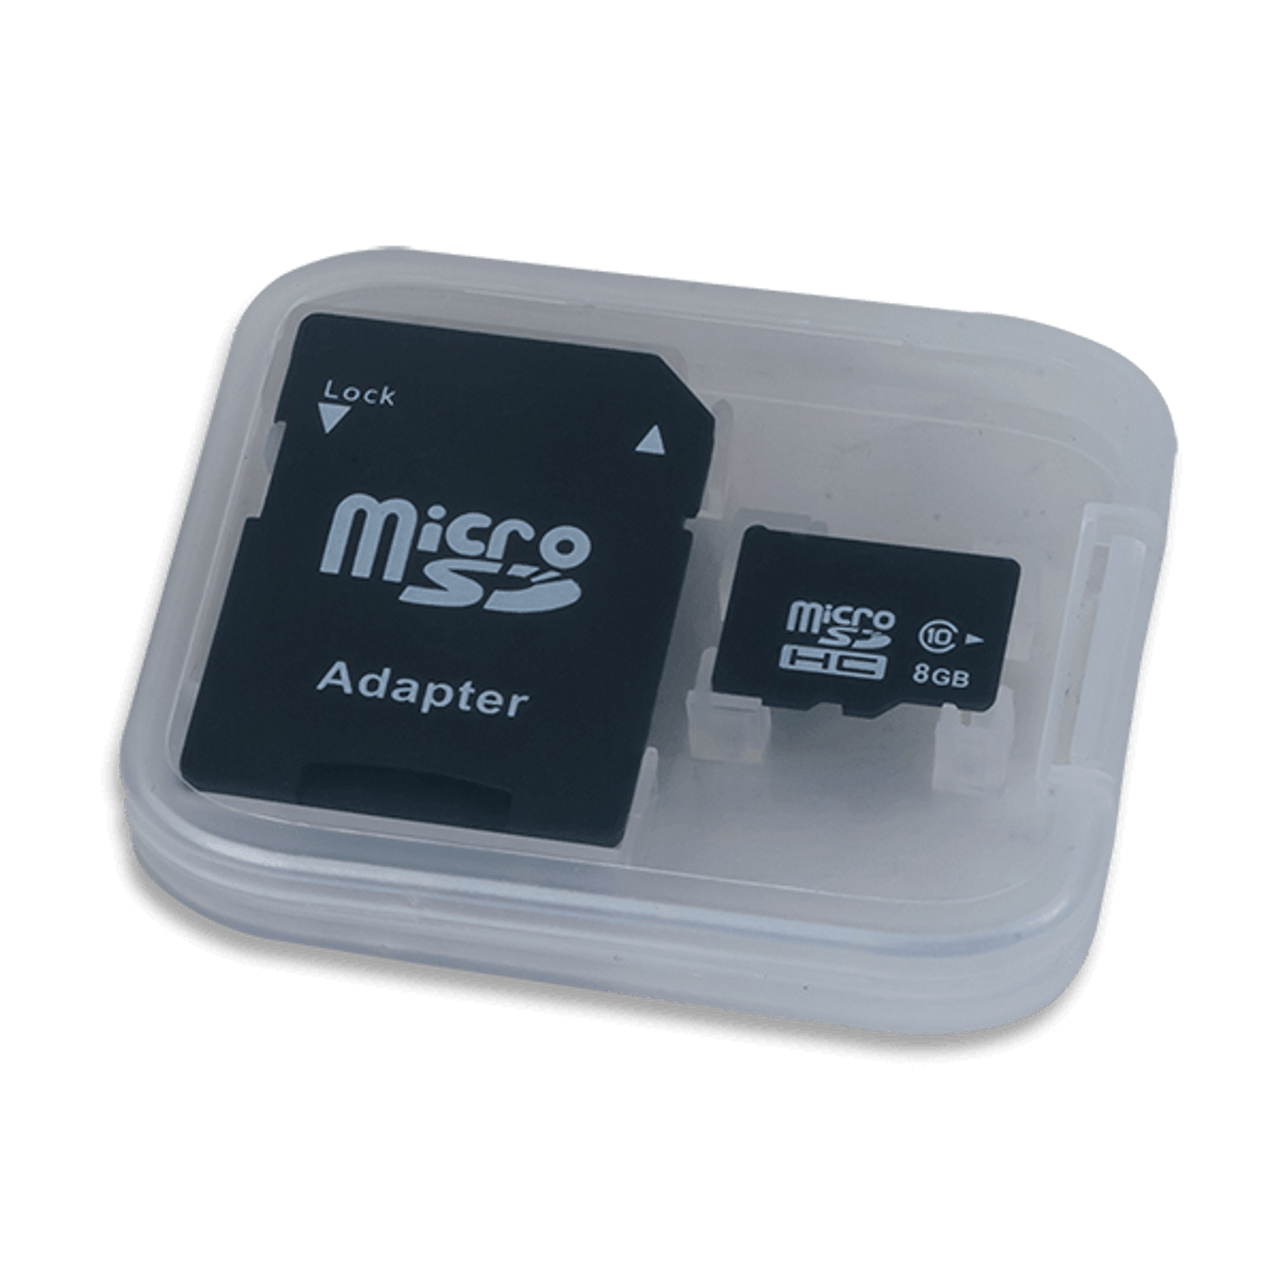 Hol binding graven MicroSD Card with Adapter - Digilent